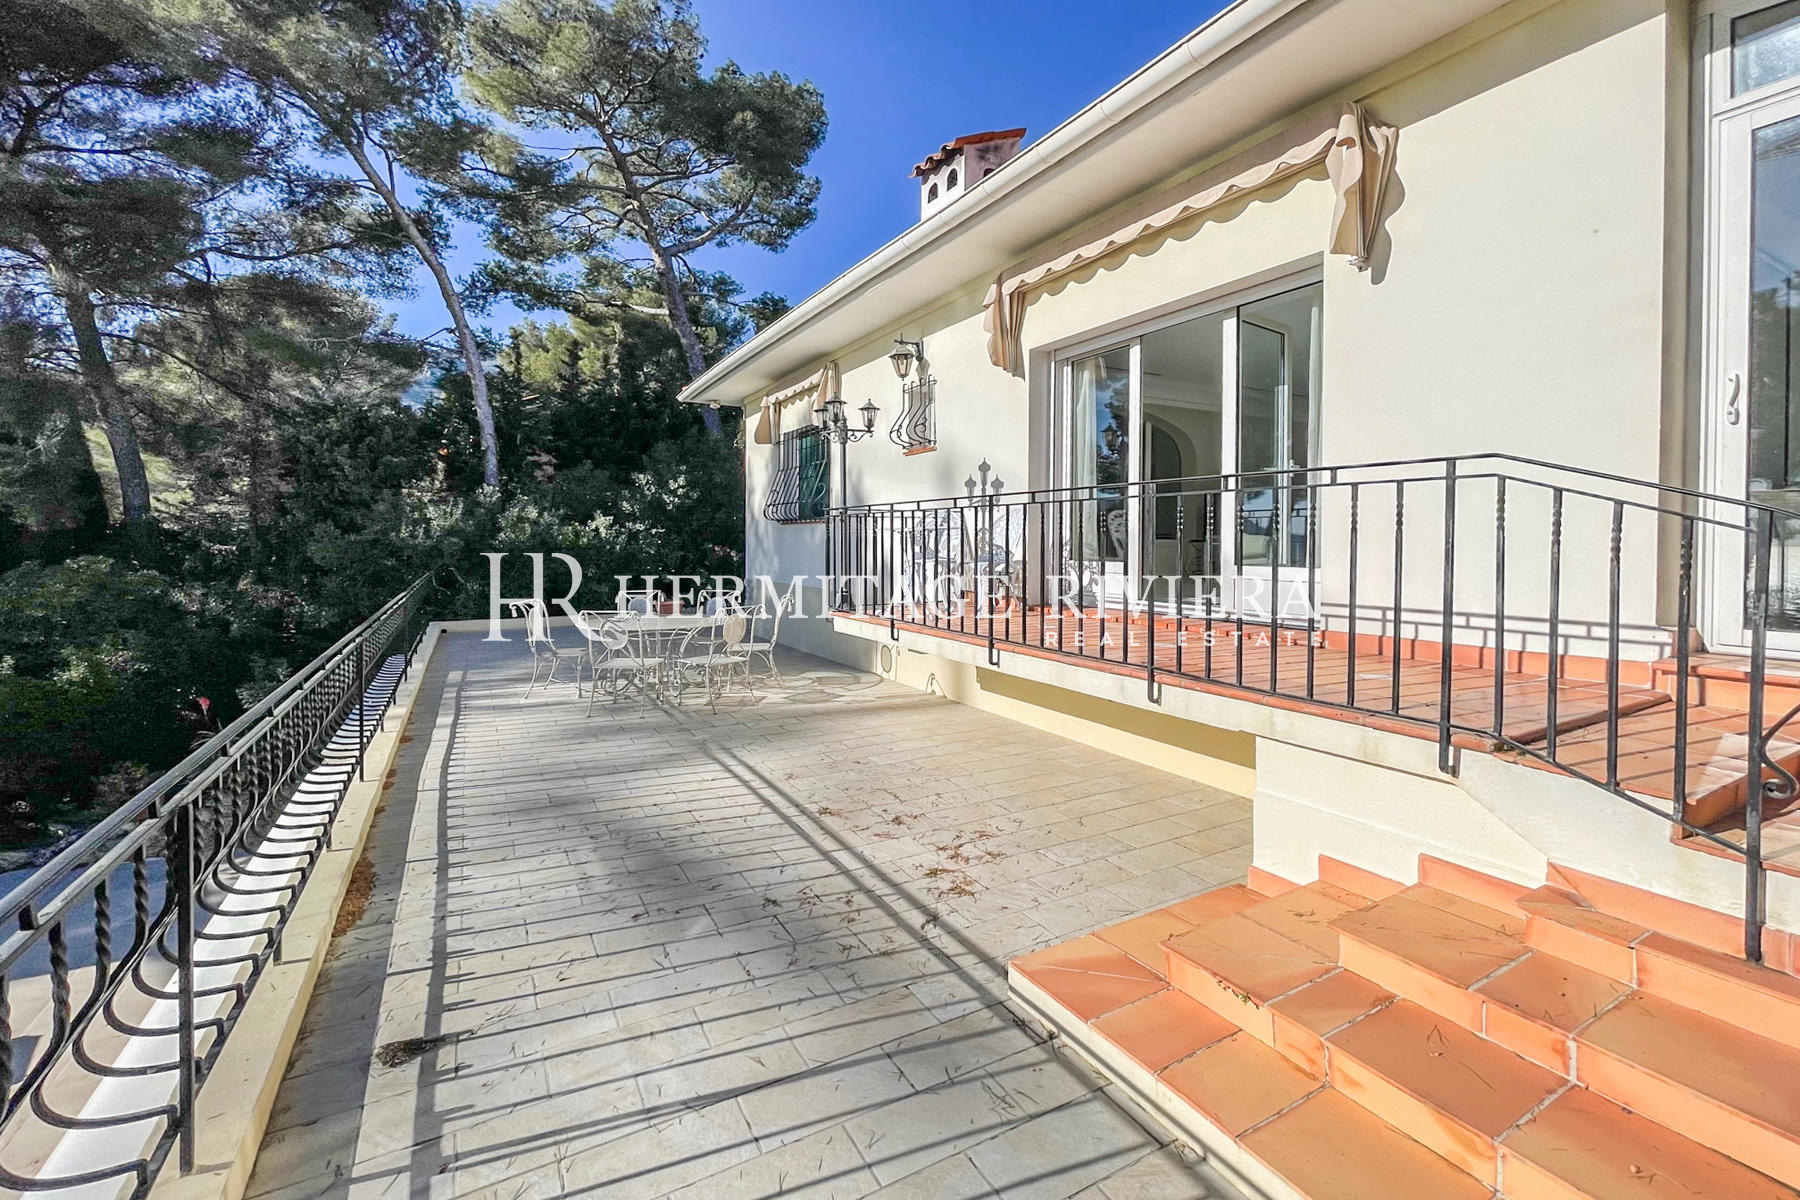 Property with views Monaco in sought after location (image 7)